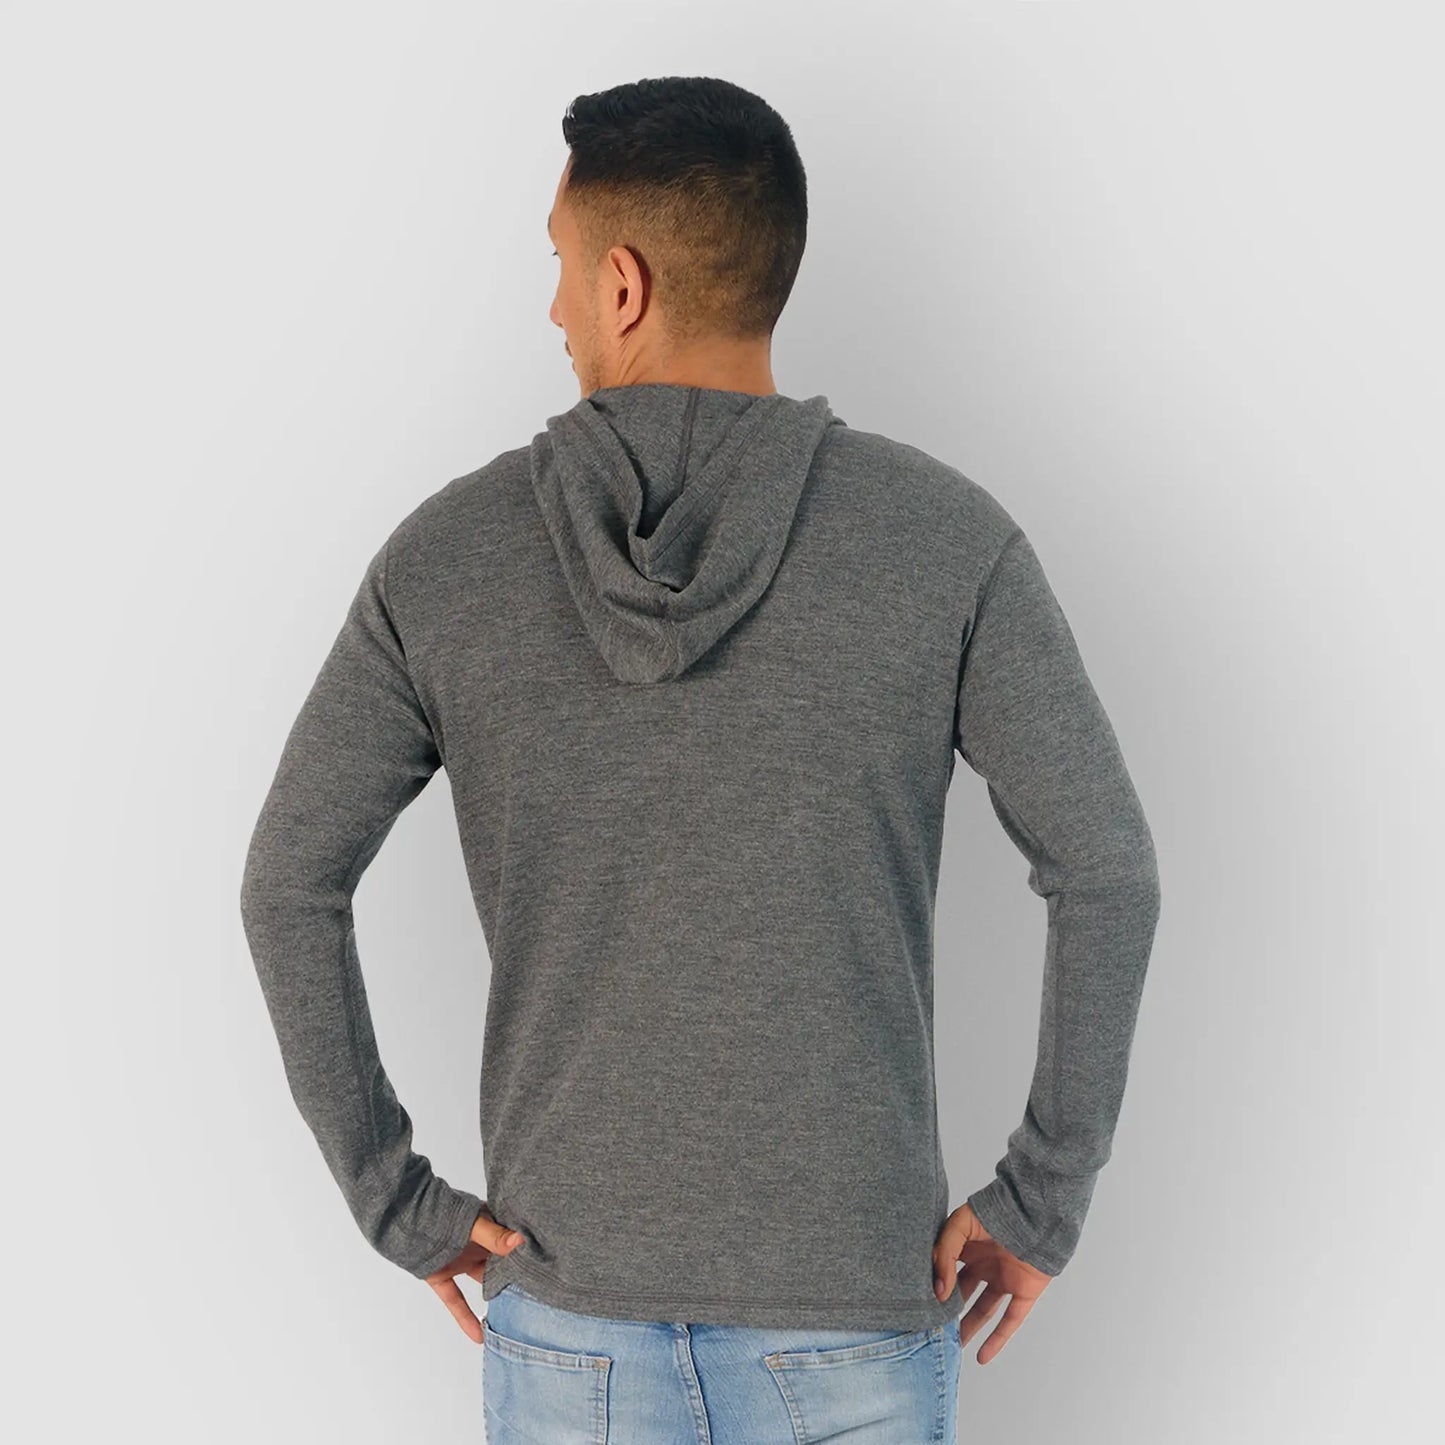 mens functional pullover hoodie lightweight color gray